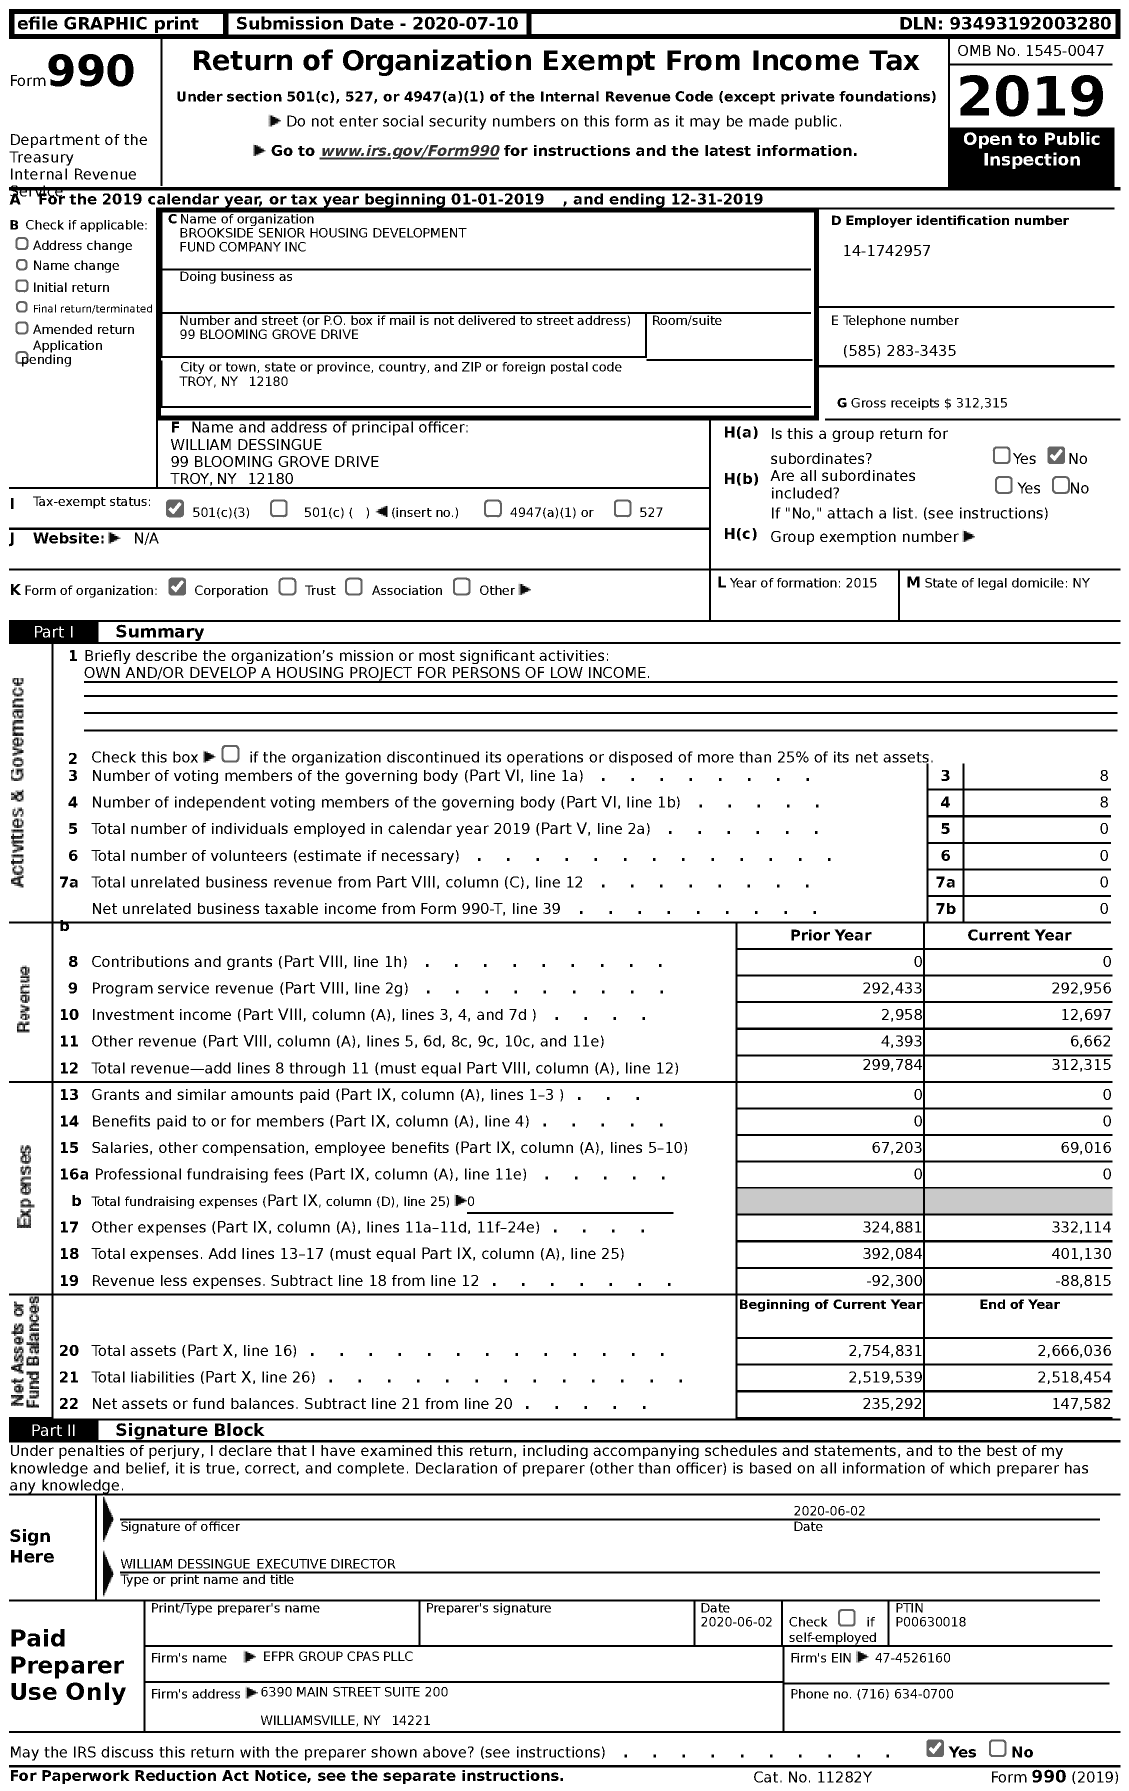 Image of first page of 2019 Form 990 for Brookside Senior Housing Development Fund Company